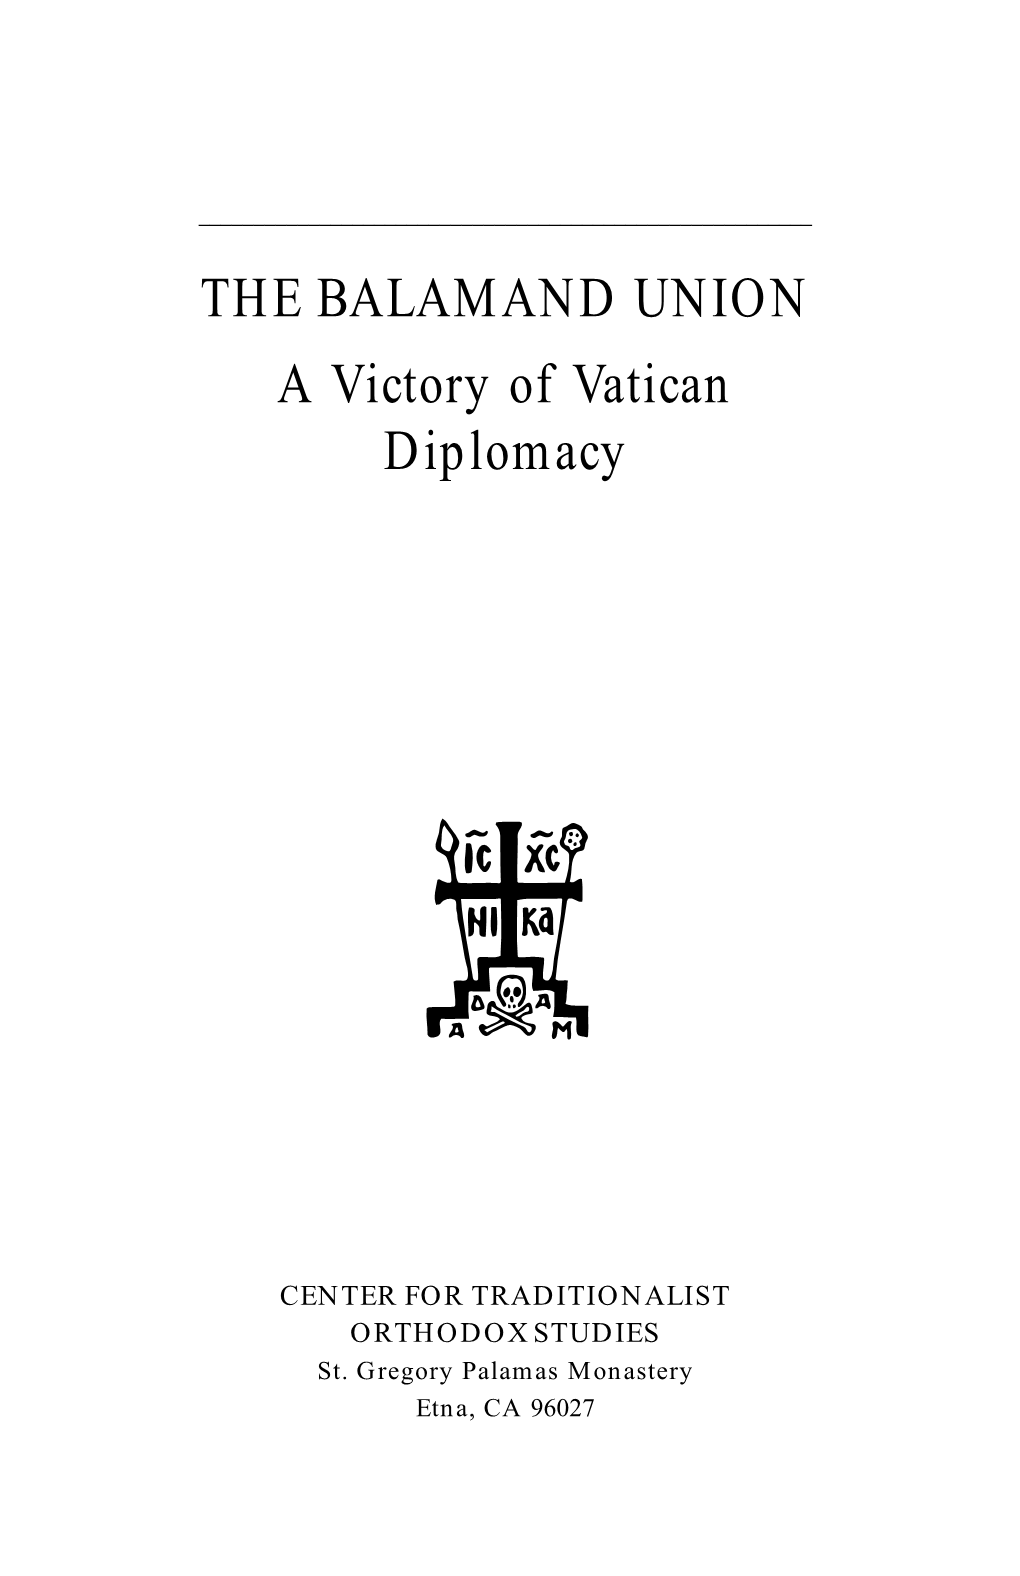 THE BALAMAND UNION a Victory of Vatican Diplomacy